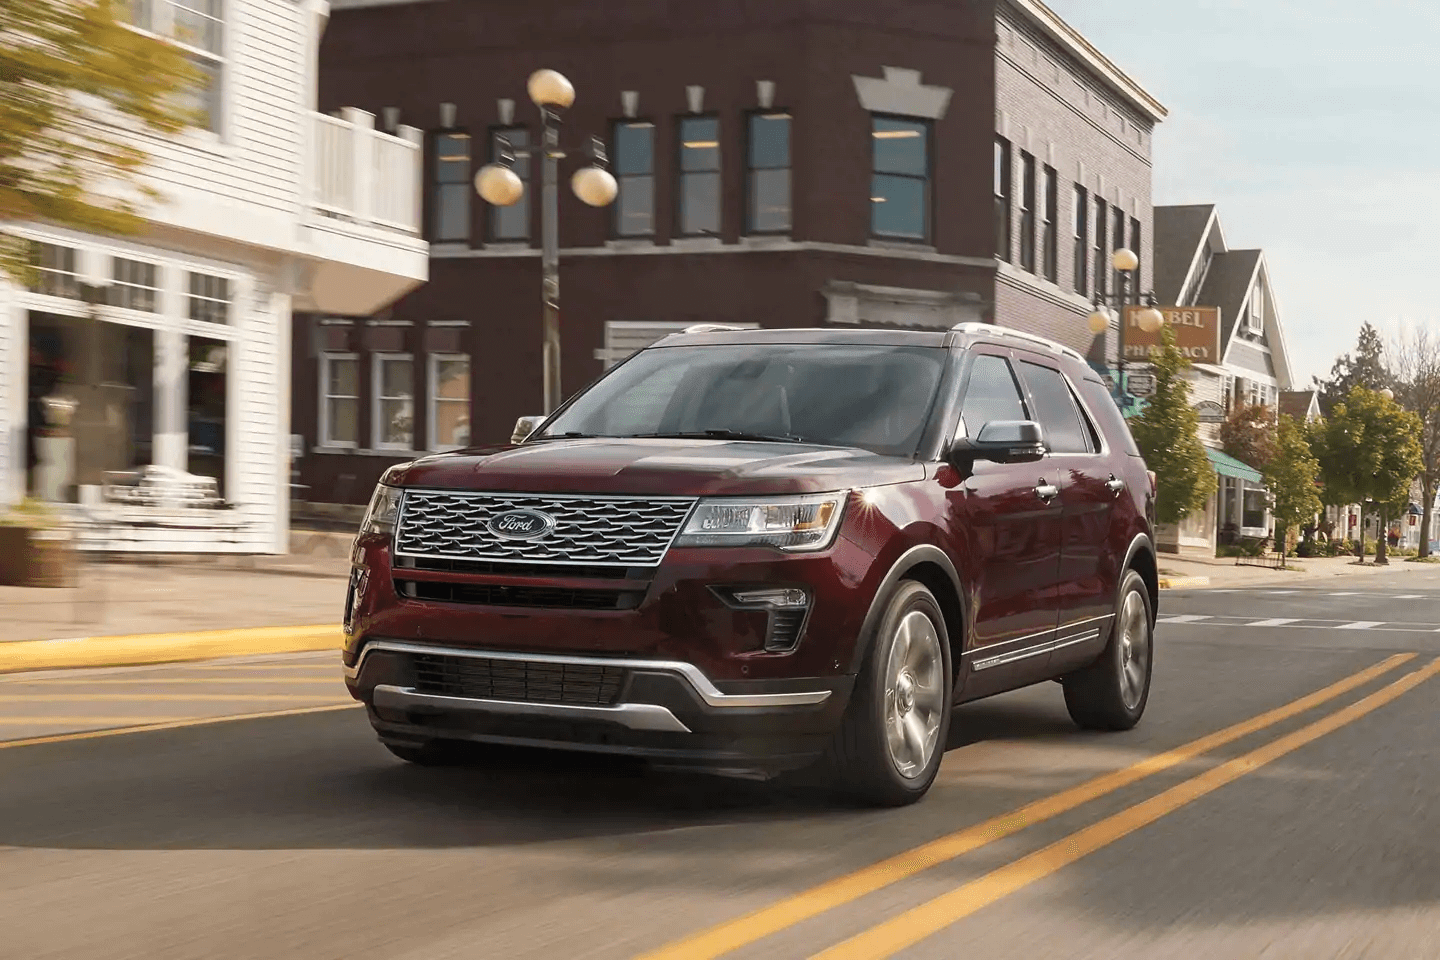 2019 Ford Explorer Suv Features And Specs College Ford Lincoln